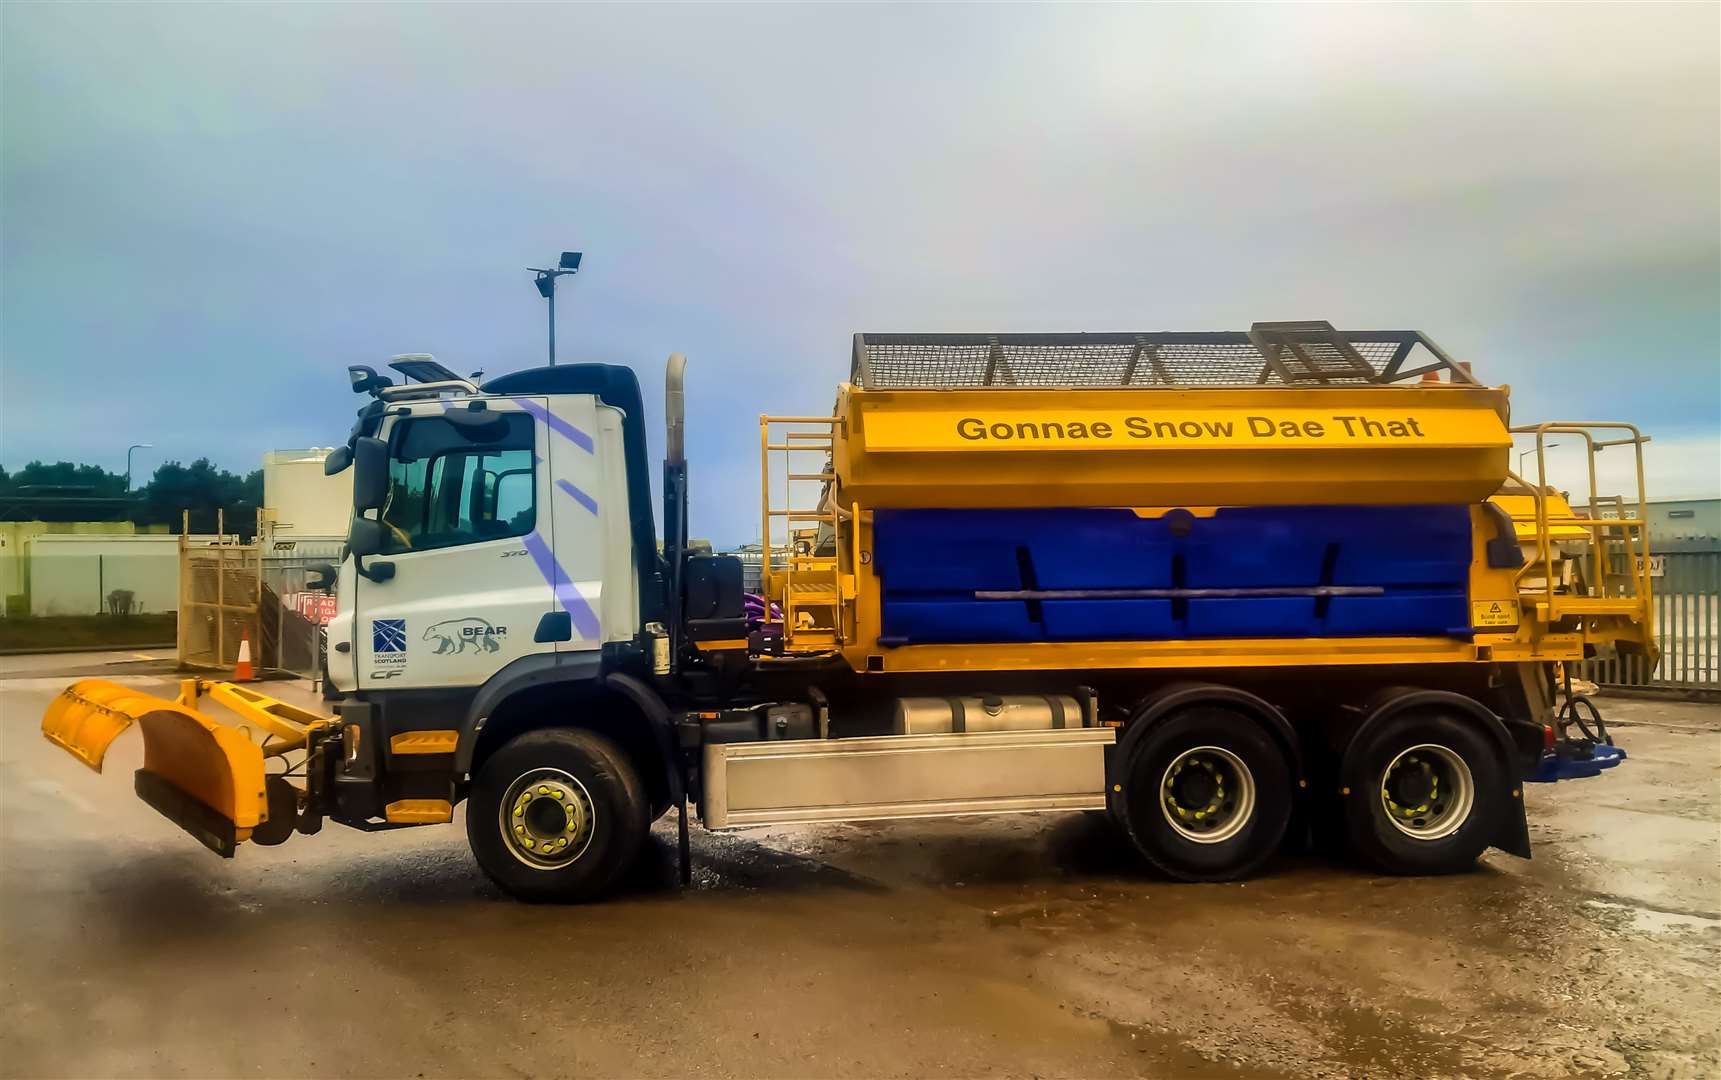 One of the Bear Scotland gritters ready to tackle the Highland's trunk roads this winter.